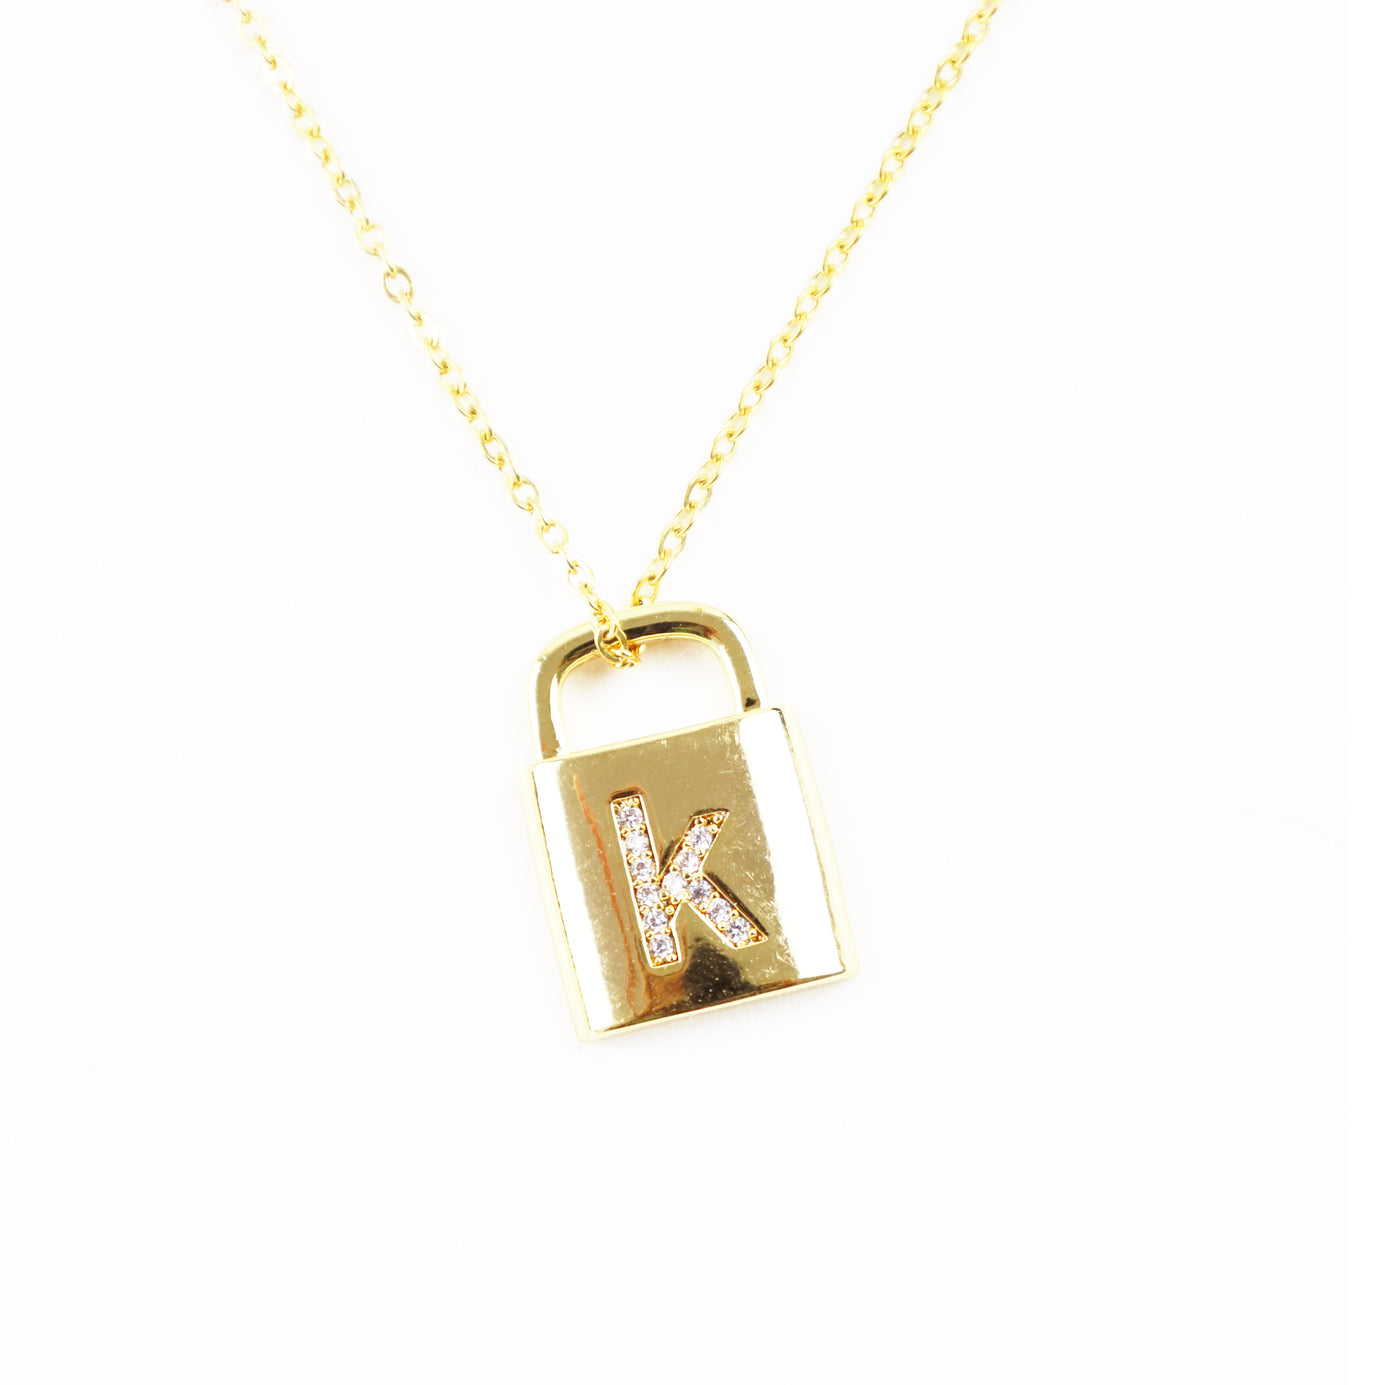 SOMEBODY TO LOVE NECKLACE